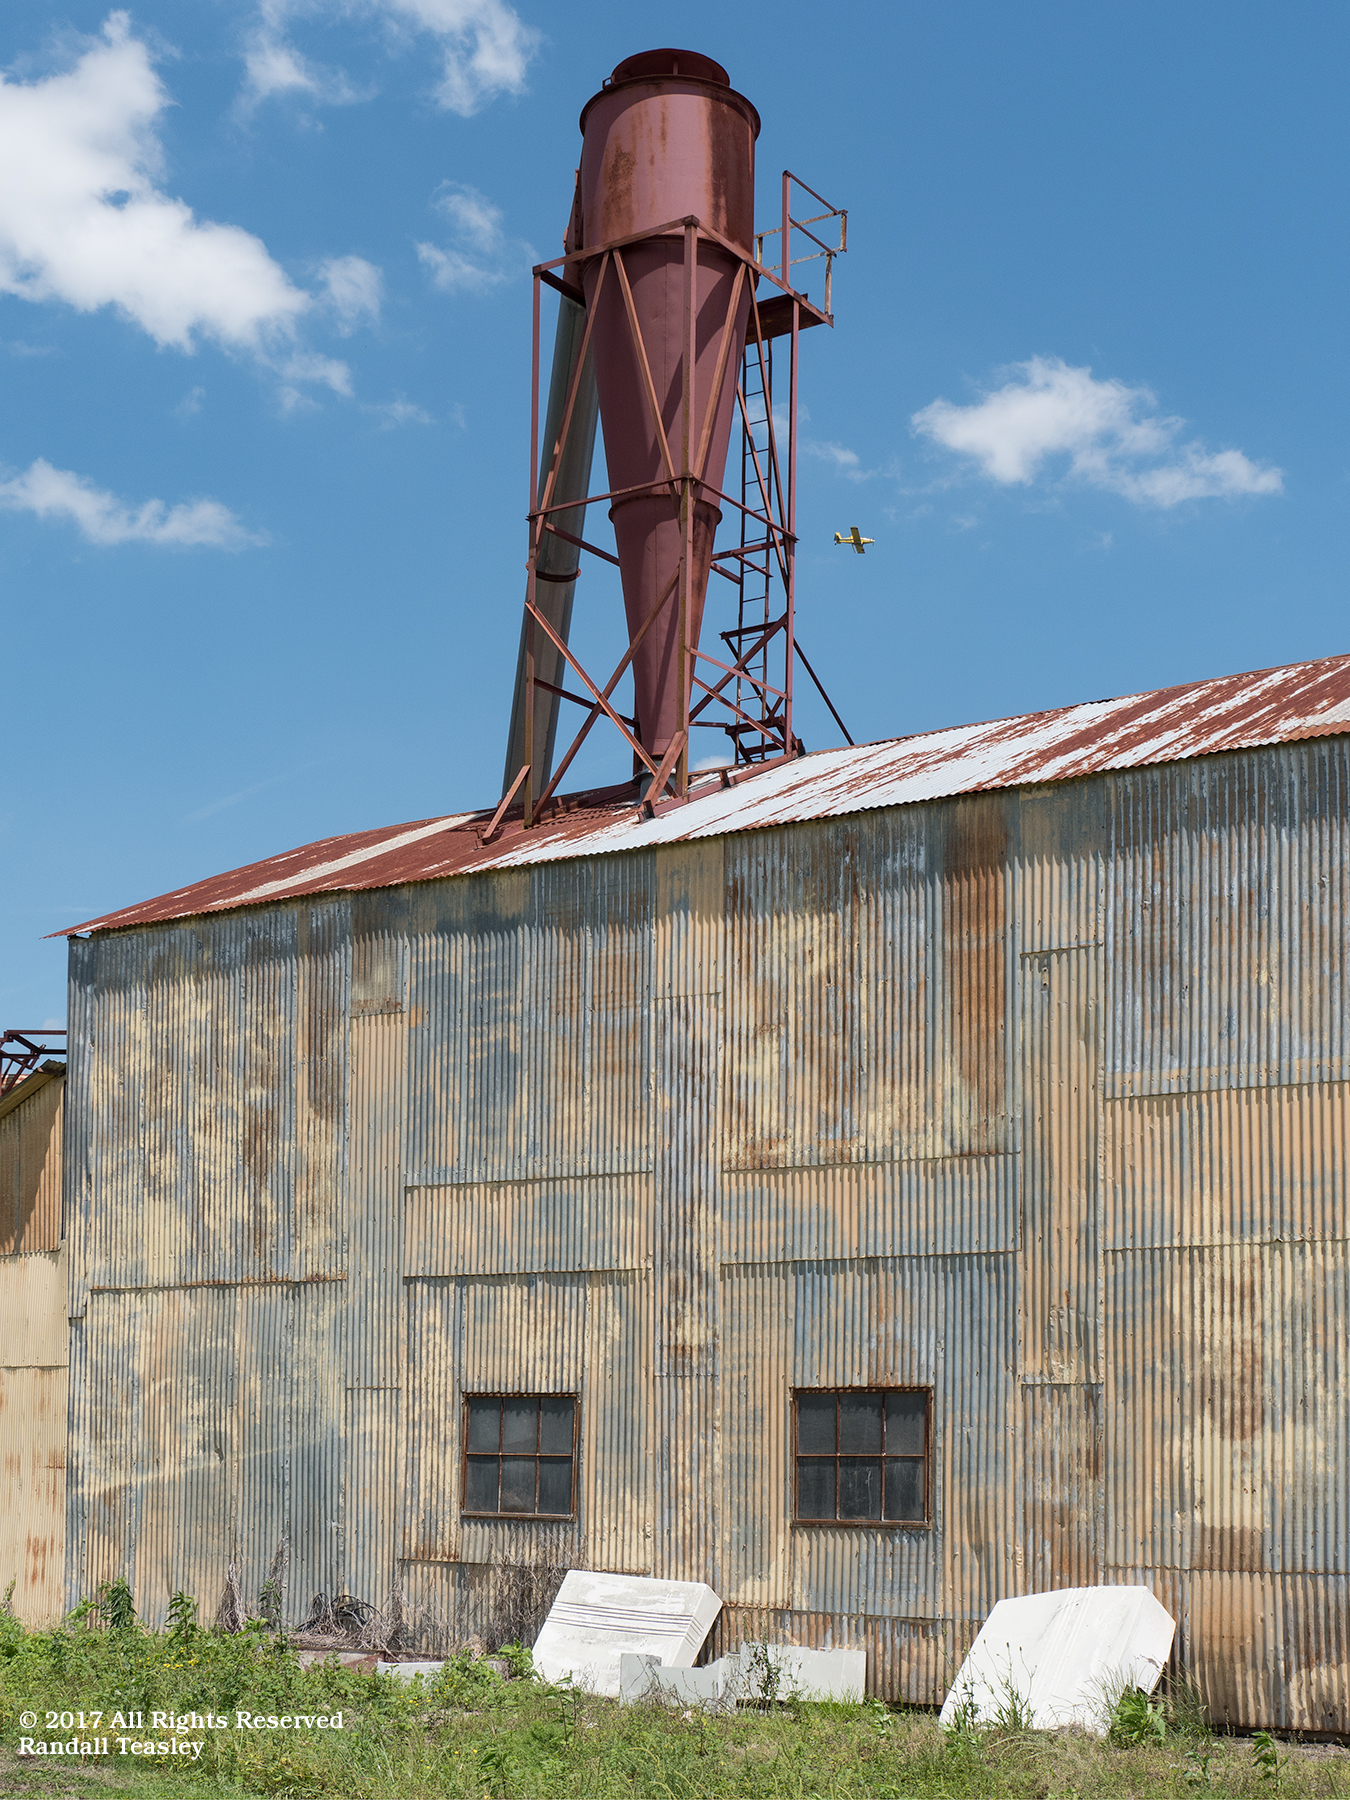 Old Cotton Gin-Shaw-MS--2017-05-25